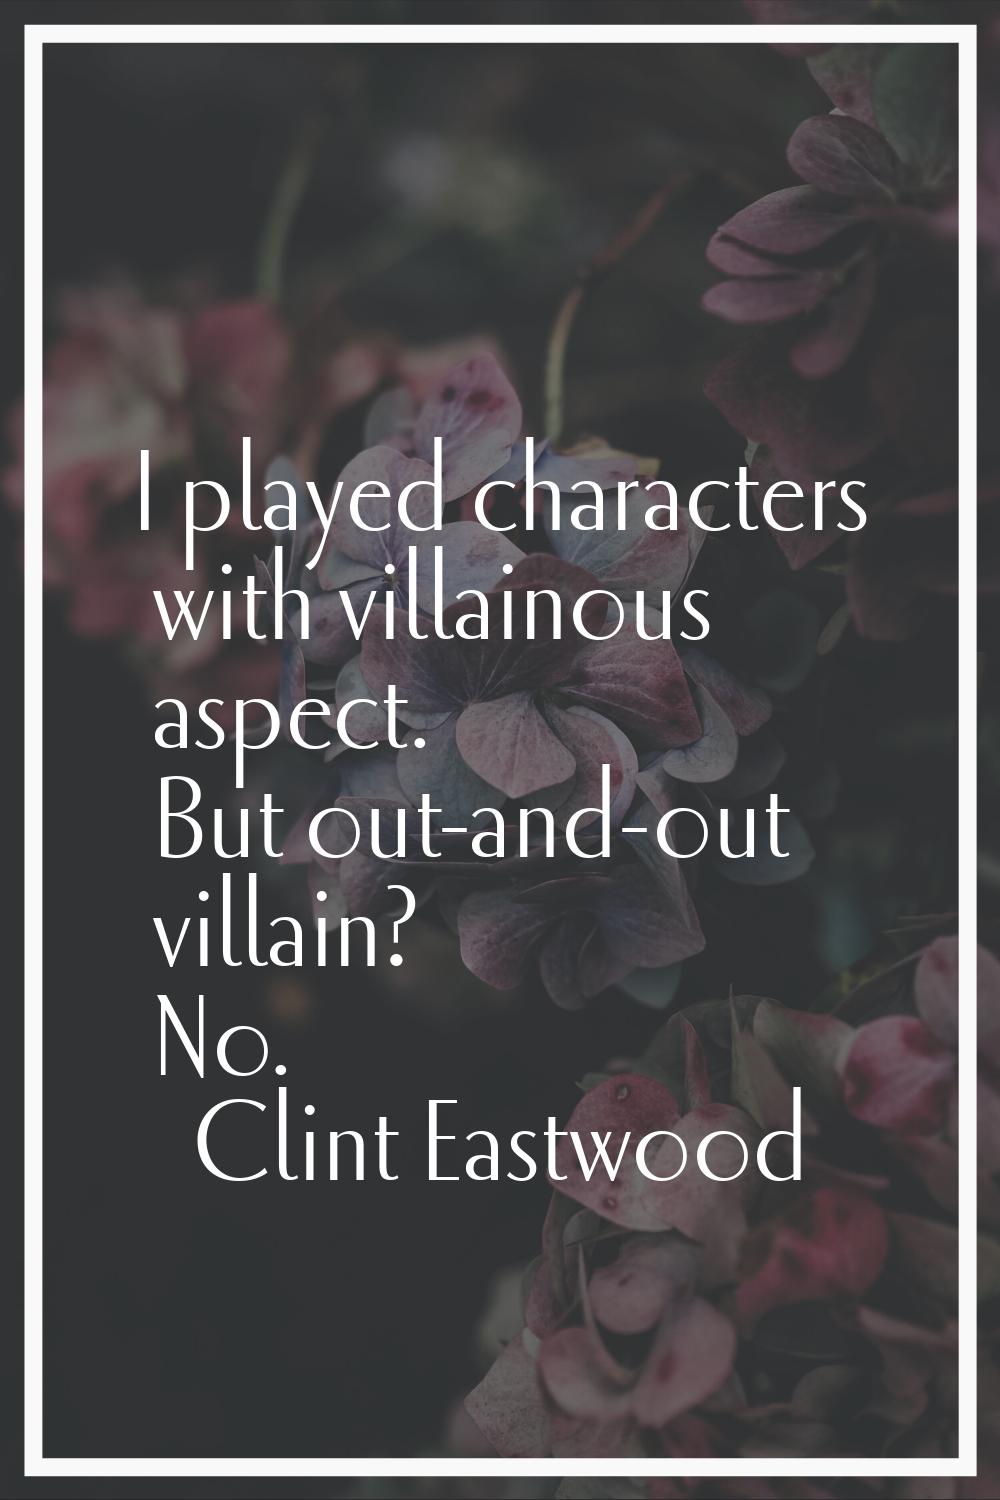 I played characters with villainous aspect. But out-and-out villain? No.